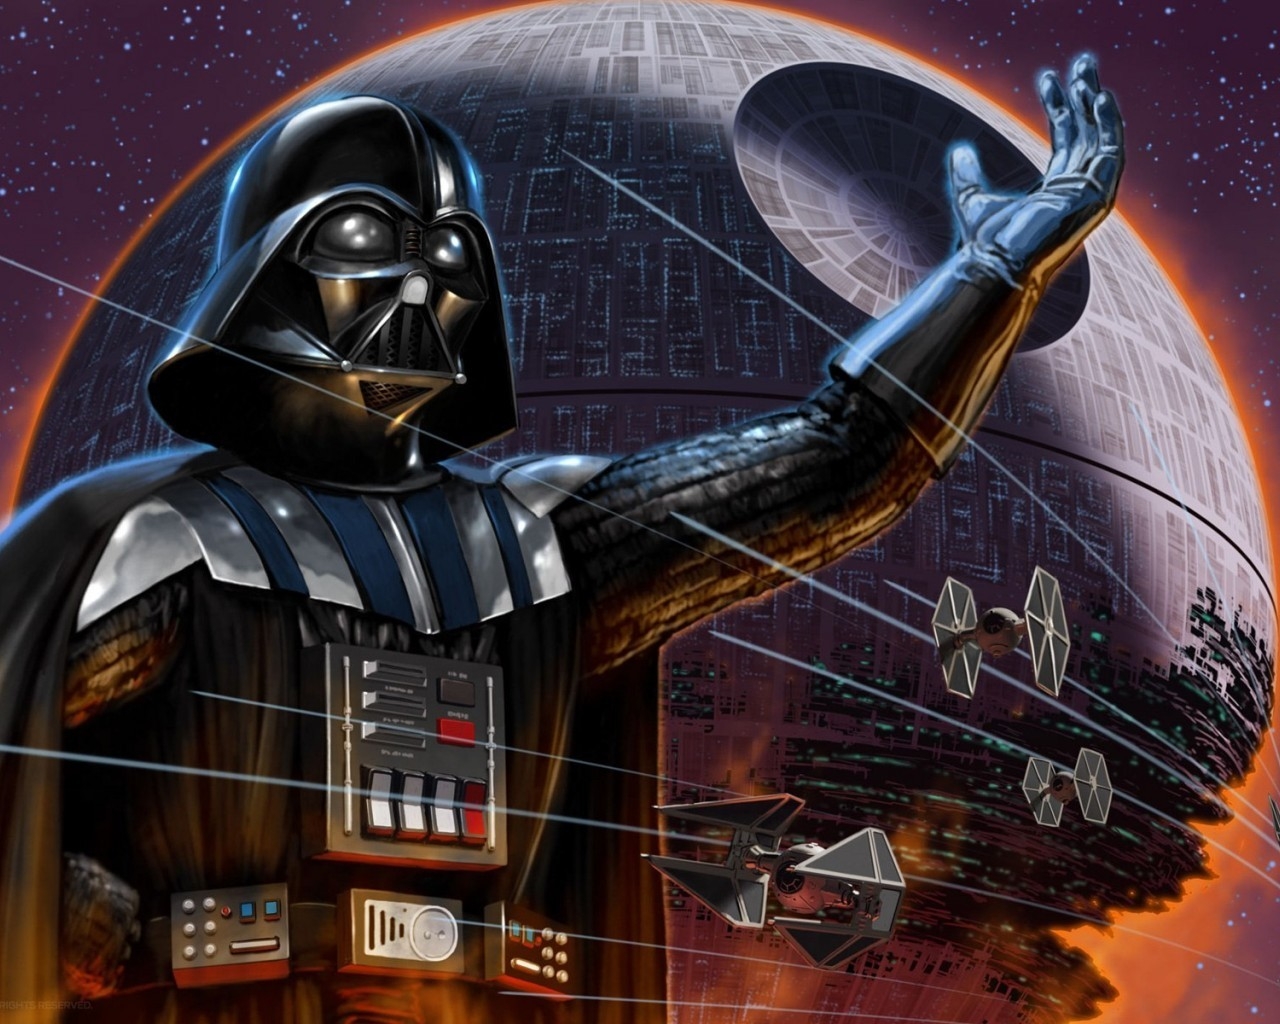 Darth Vader Star Wars Character for 1280 x 1024 resolution